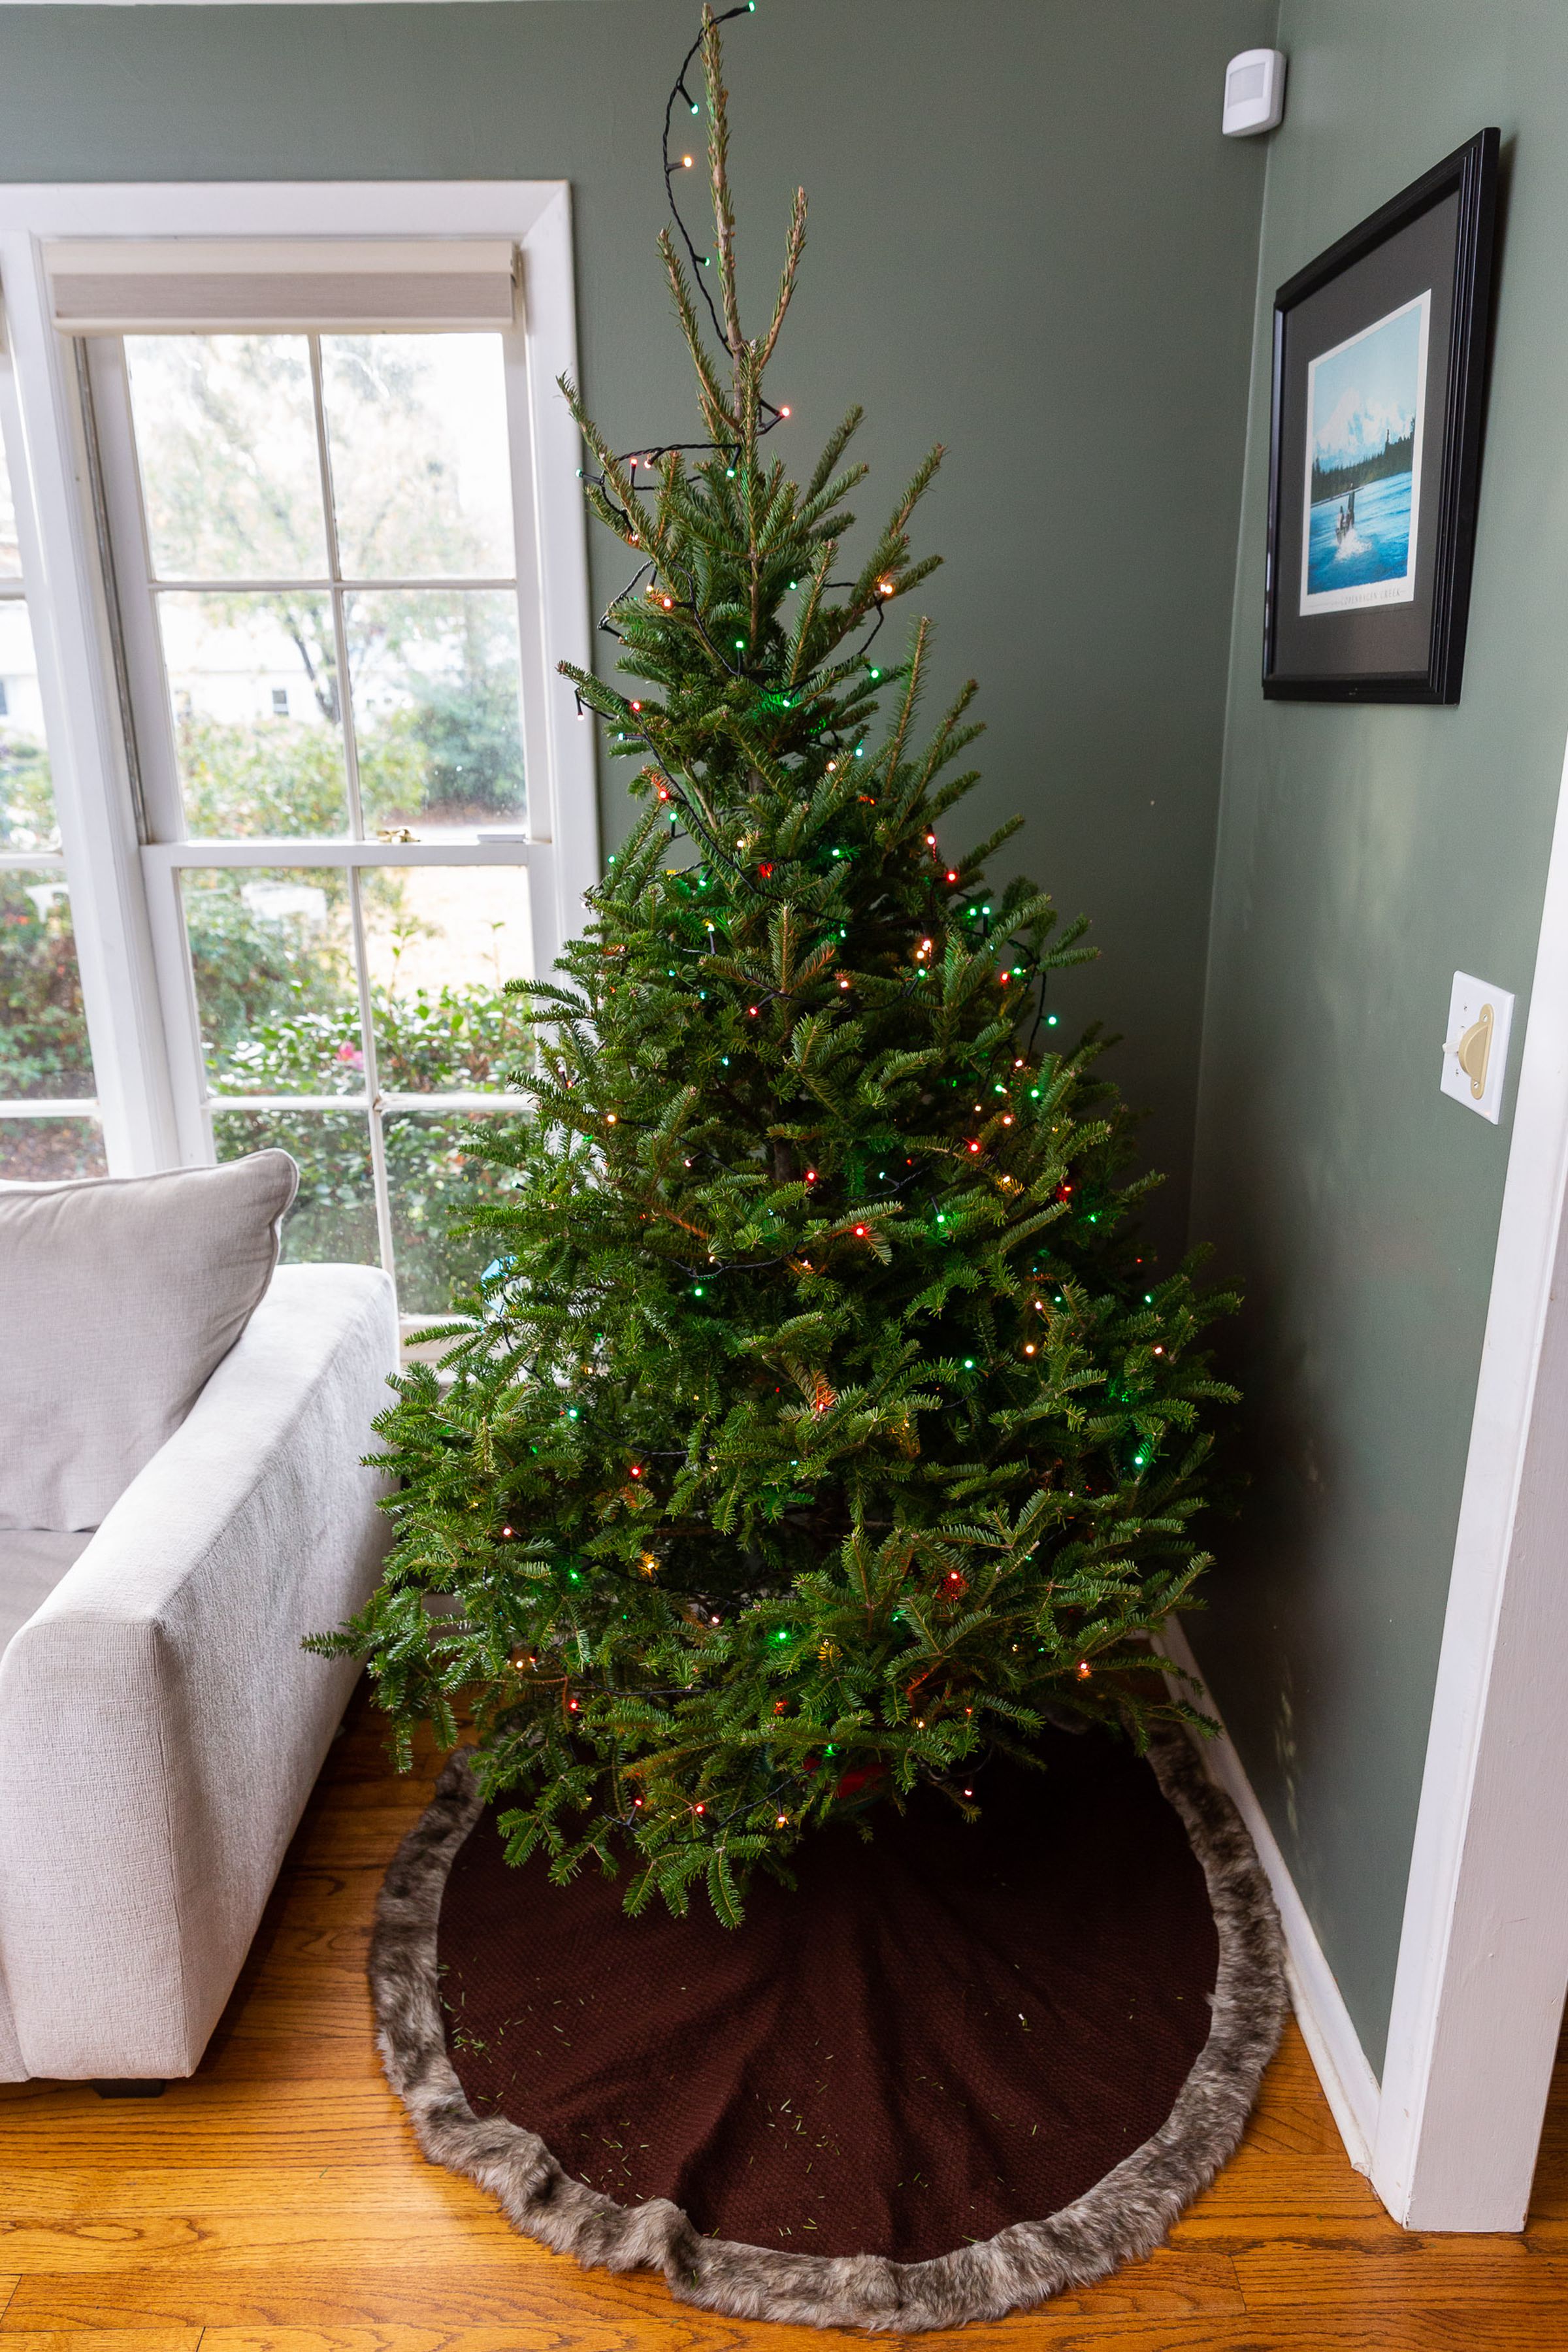 Photo of a seven-foot Christmas tree in daylight. Spots of light from string lights are visible in its branches.